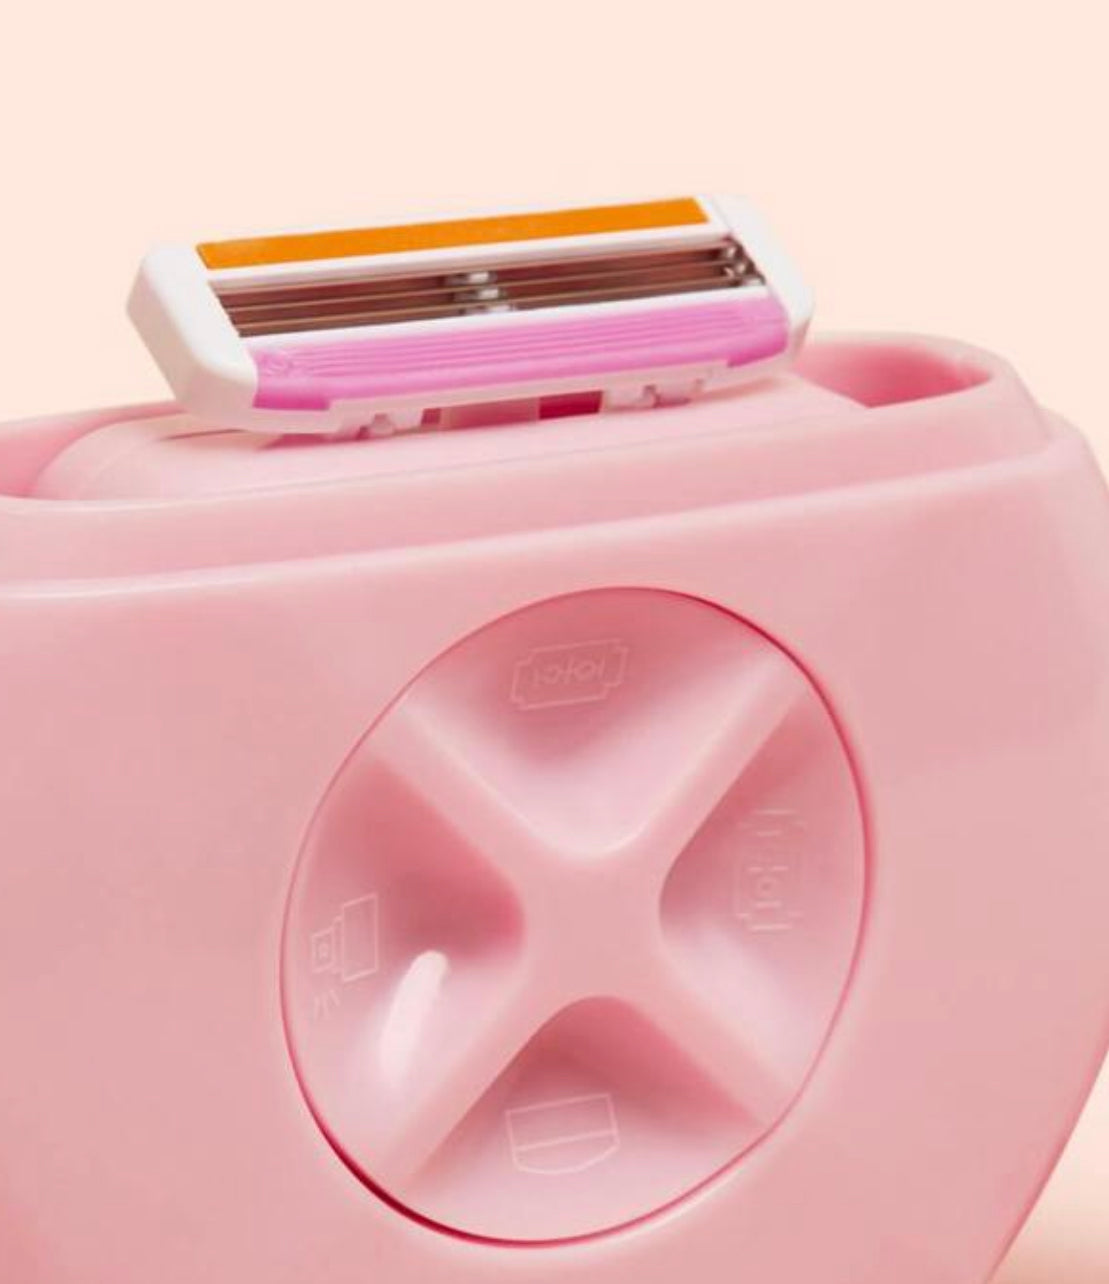 Alleyoop ‘All-In-One Portable Razor’ - Cha Boutique